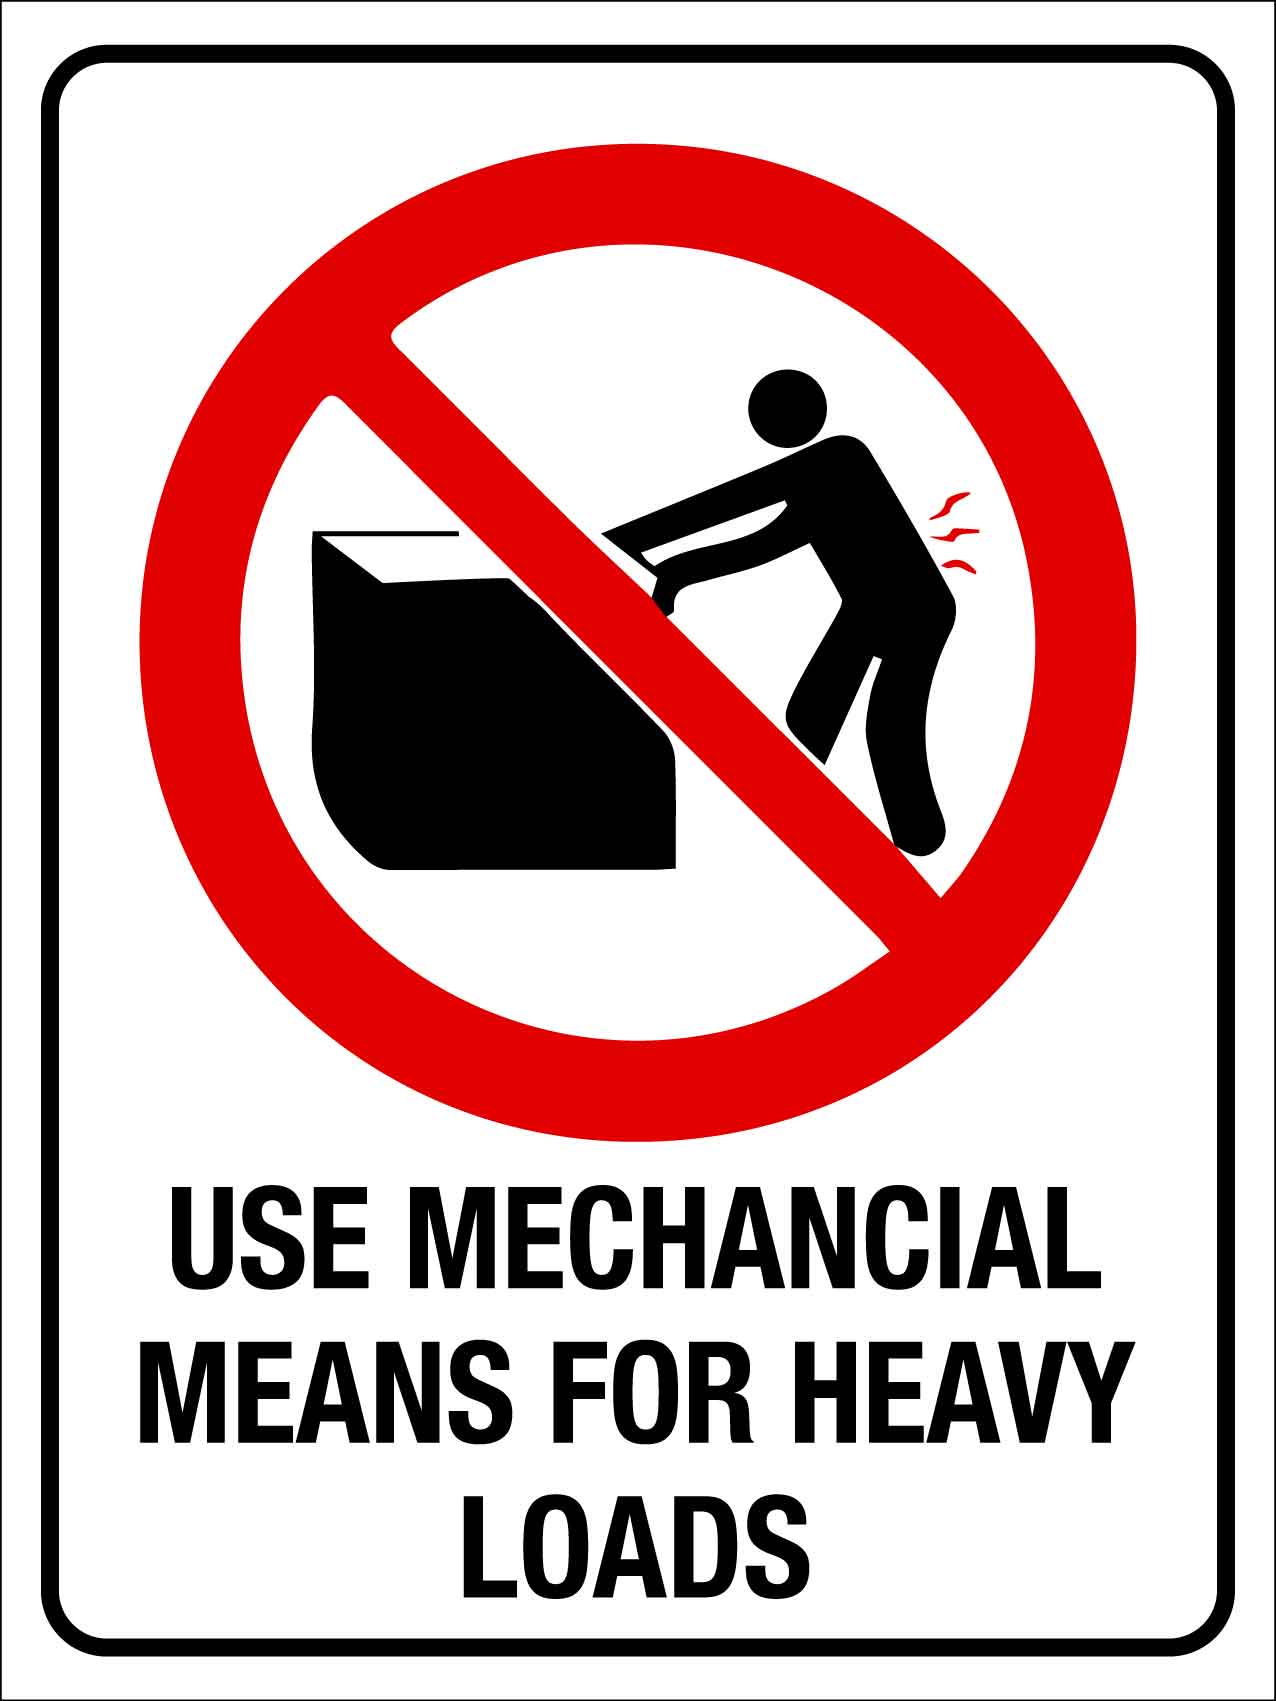 Use Mechanical Means for Heavy Loads Sign